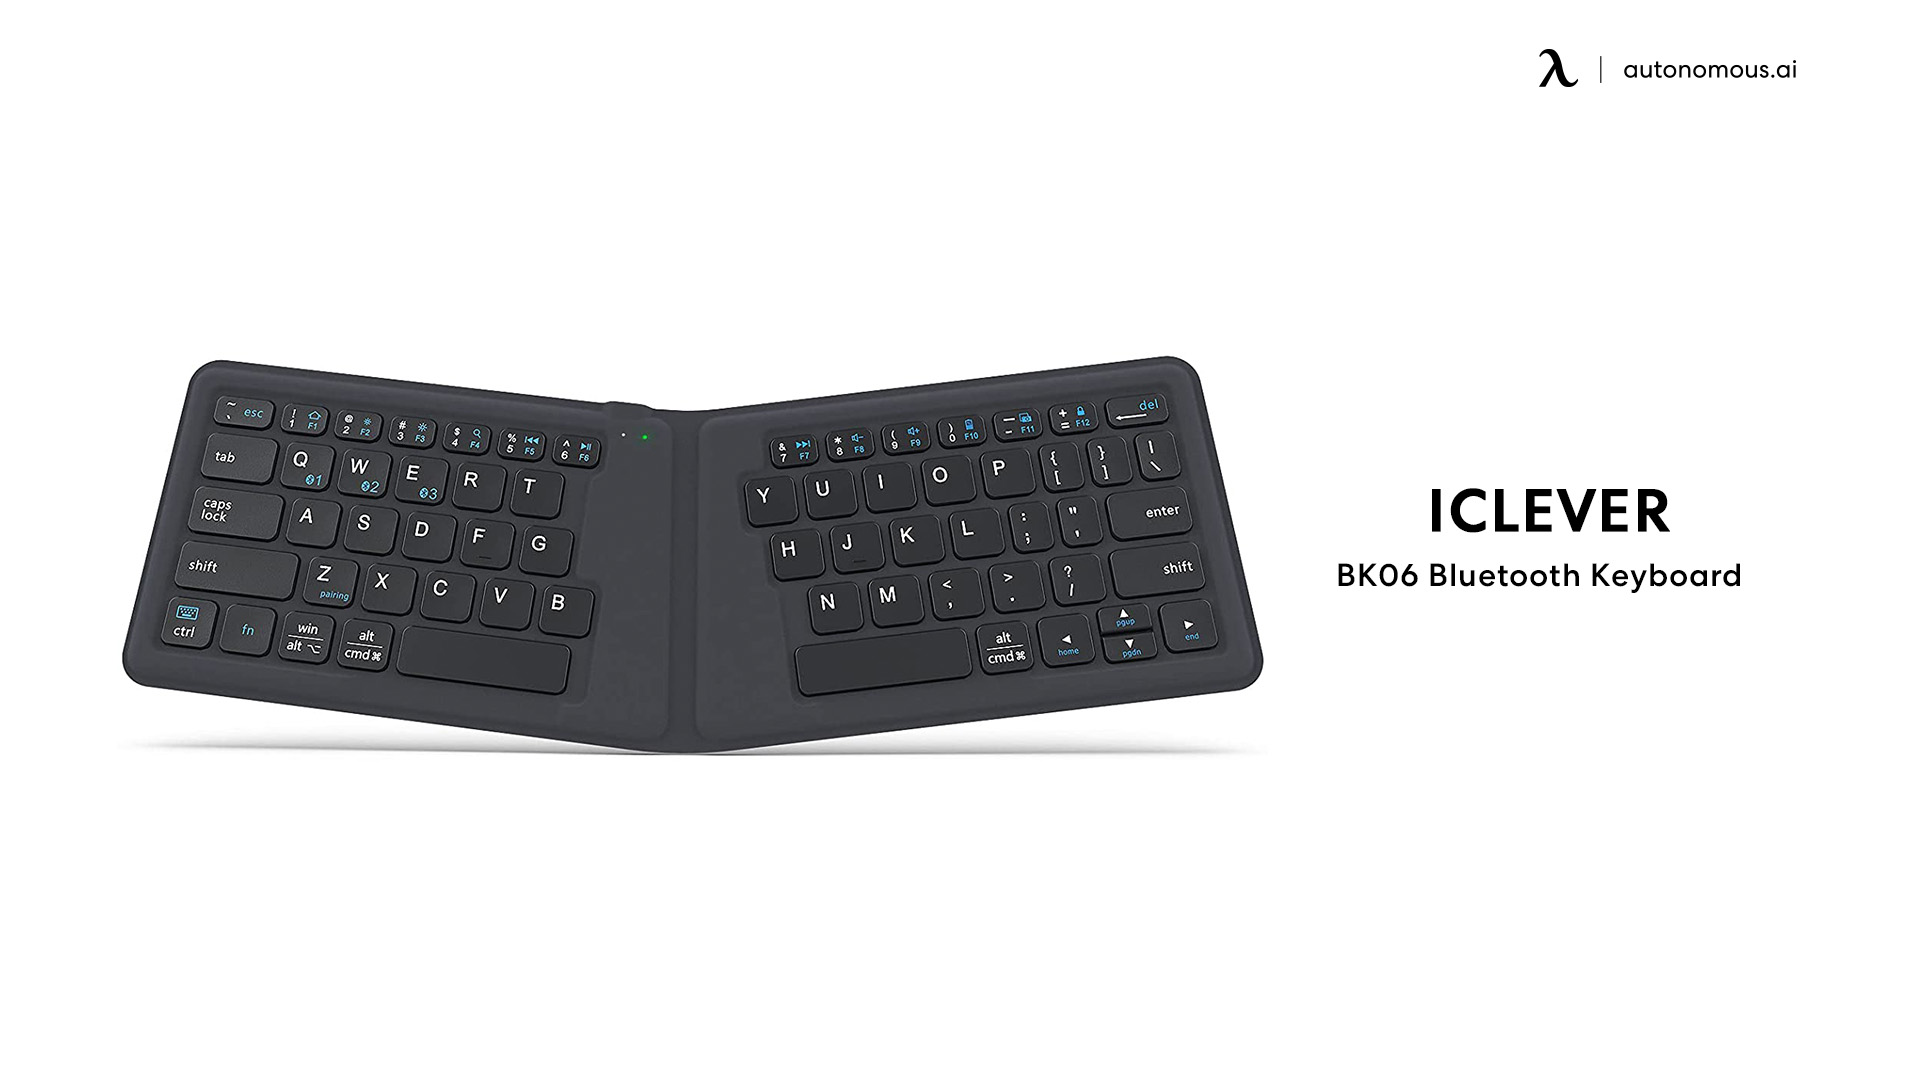 BK06 Bluetooth Keyboard by iClever